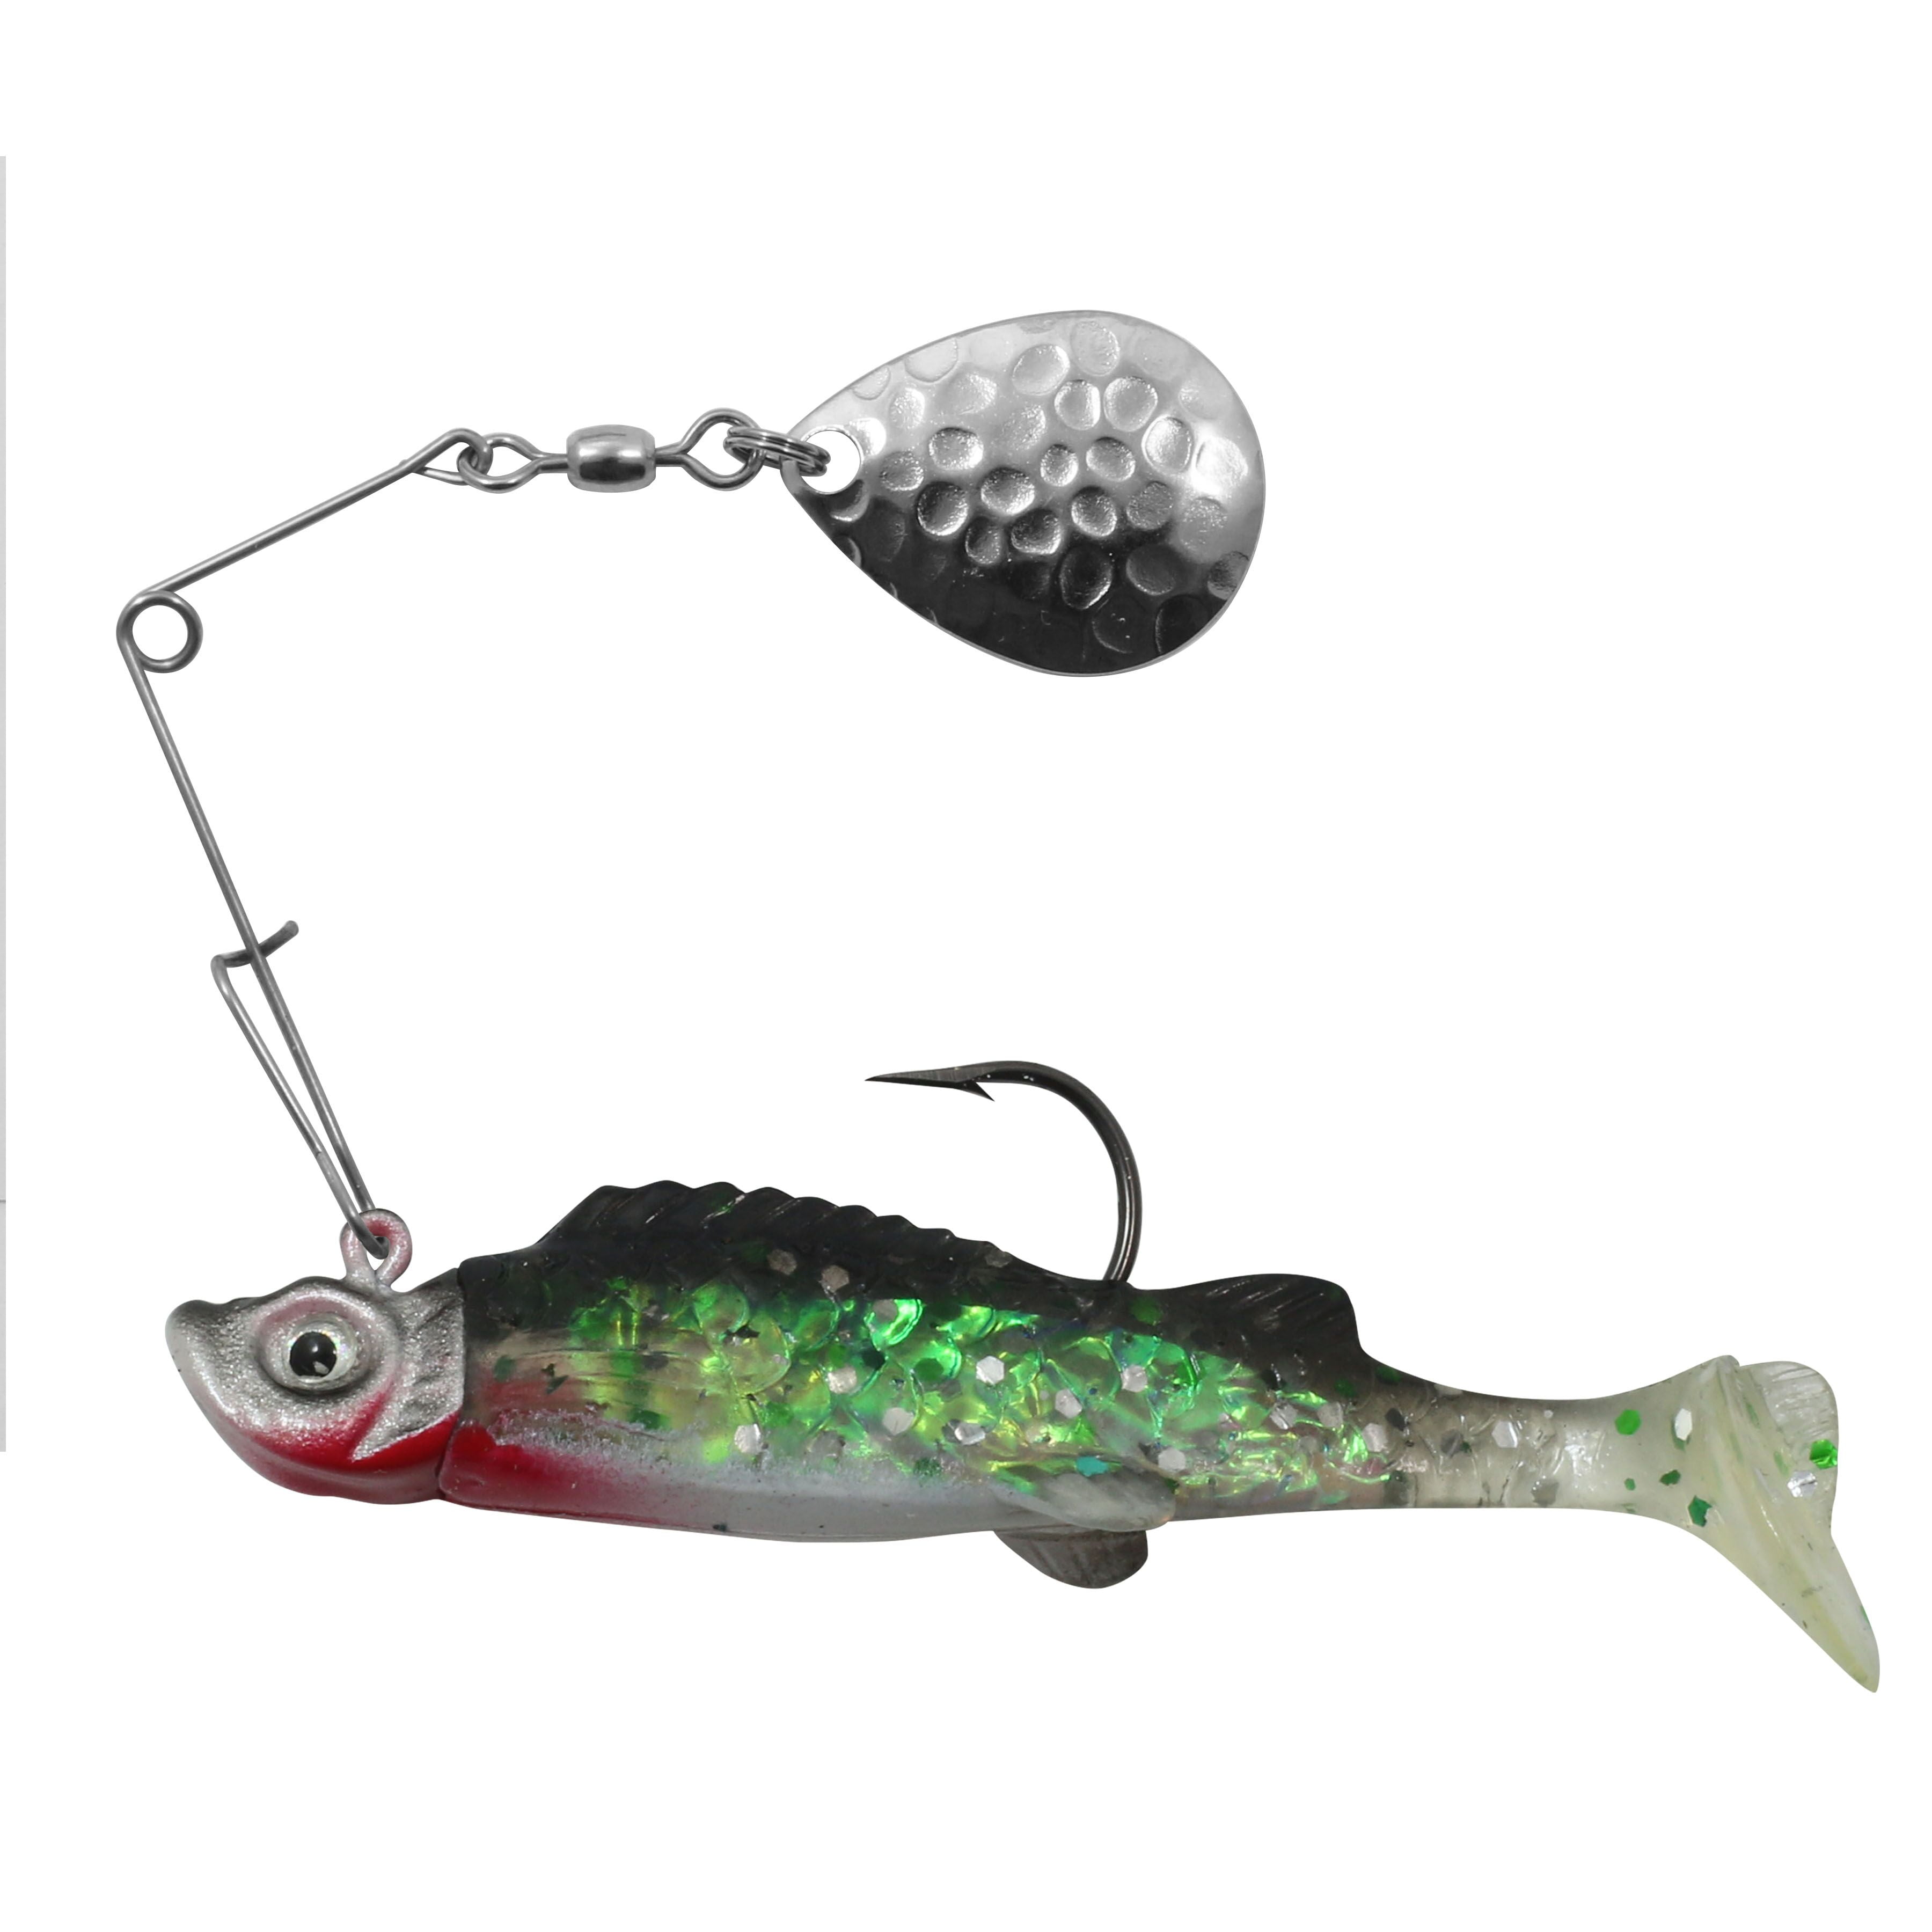 Northland Tackle Mimic Minnow Spin, Spinner Jig and Tail, Freshwater,  Silver Shiner